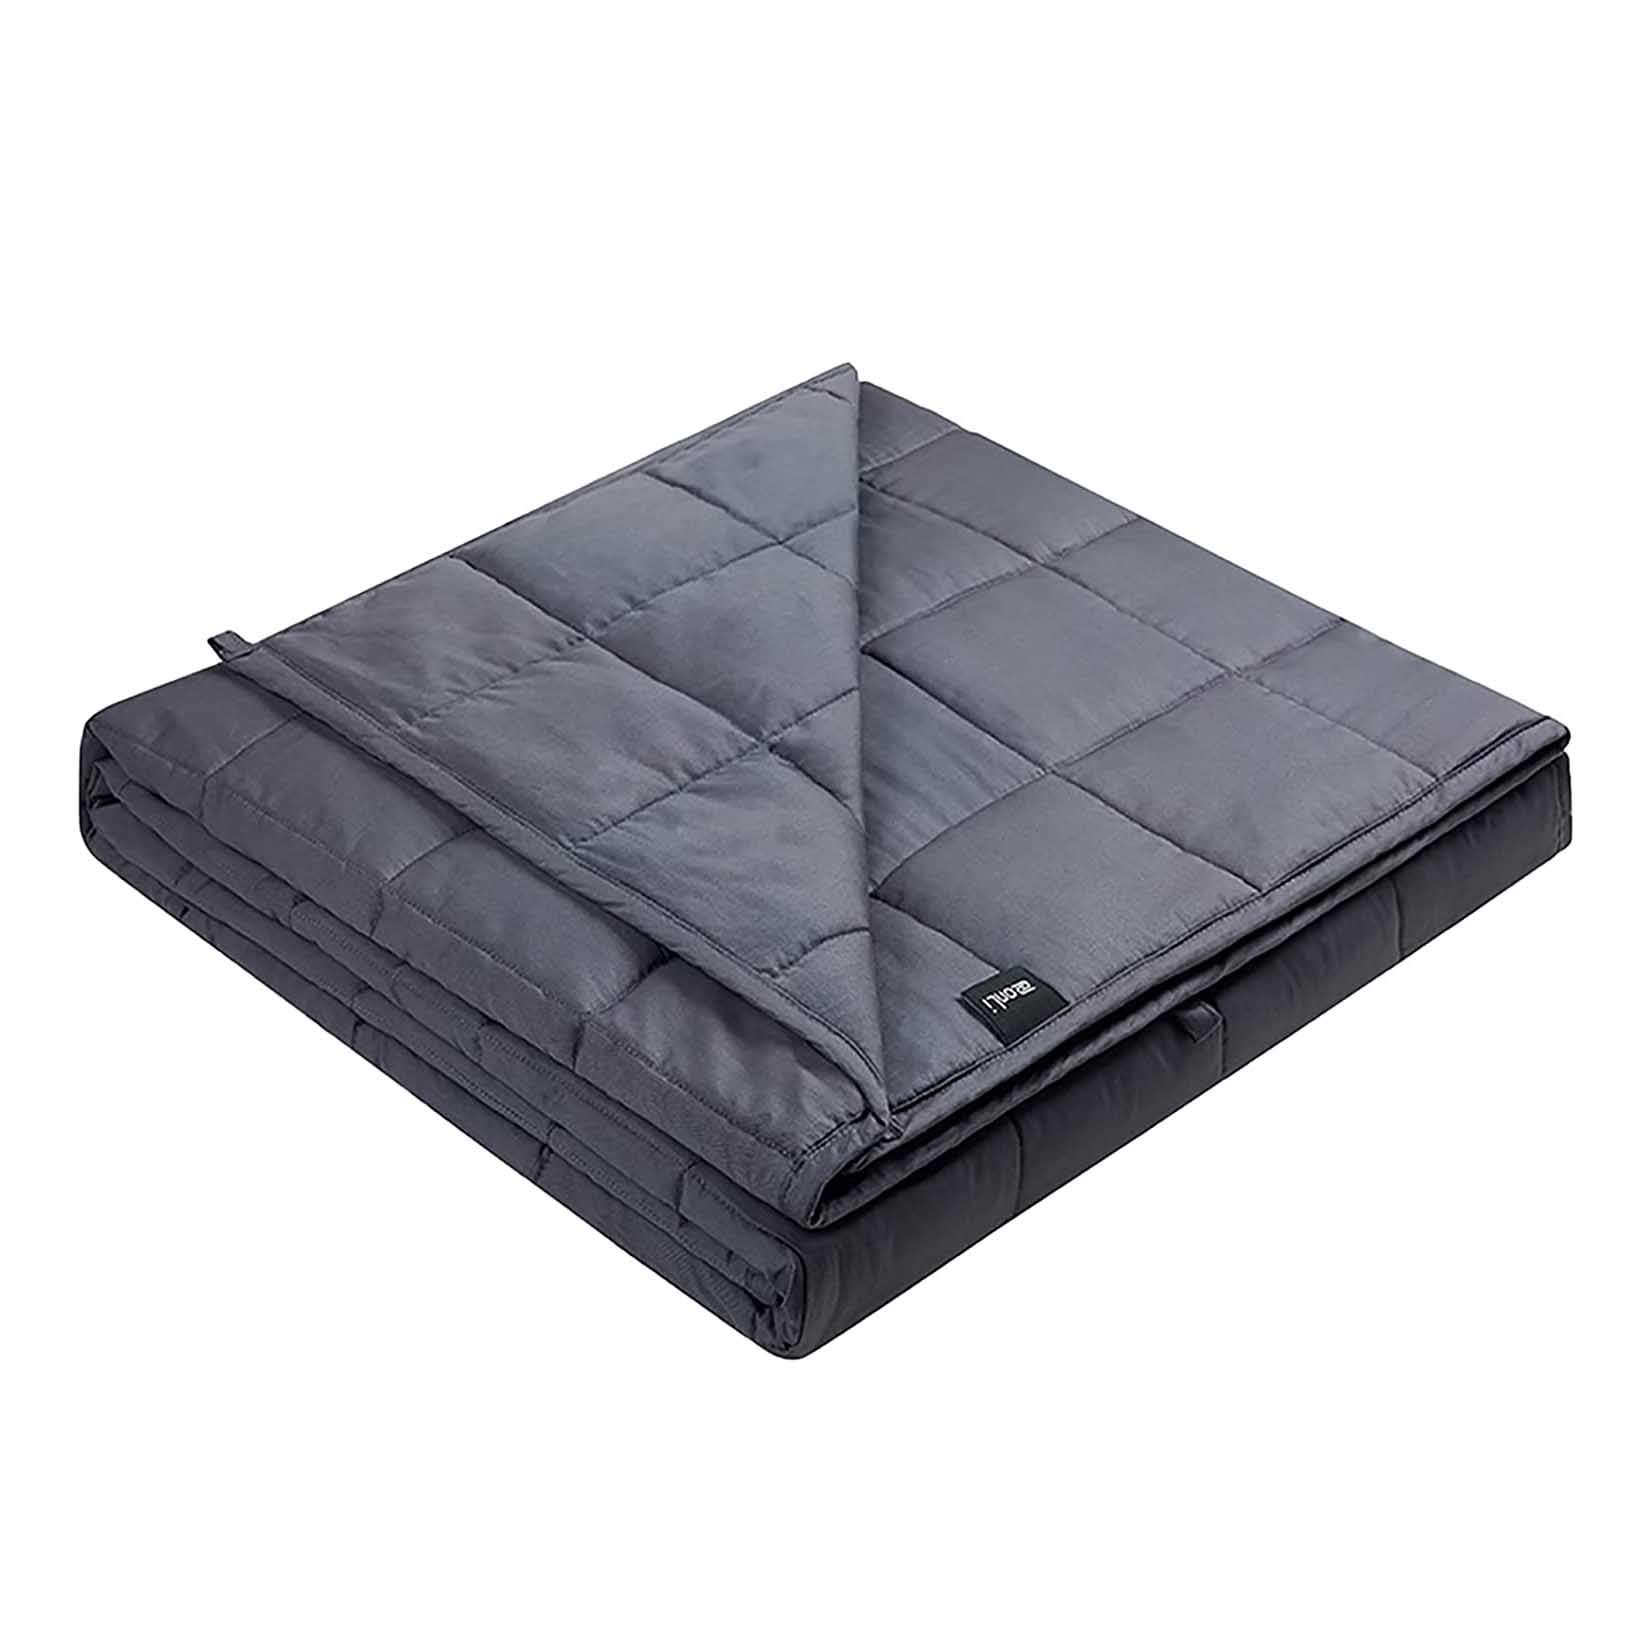 Best OEM Bamboo Weighted Blanket Company- Weighted Blanket (60”x80”, 20lbs, Dark Grey), Cooling Weighted Blanket for Adults, High Breathability Heavy Blanket, Soft Material with Premiu...